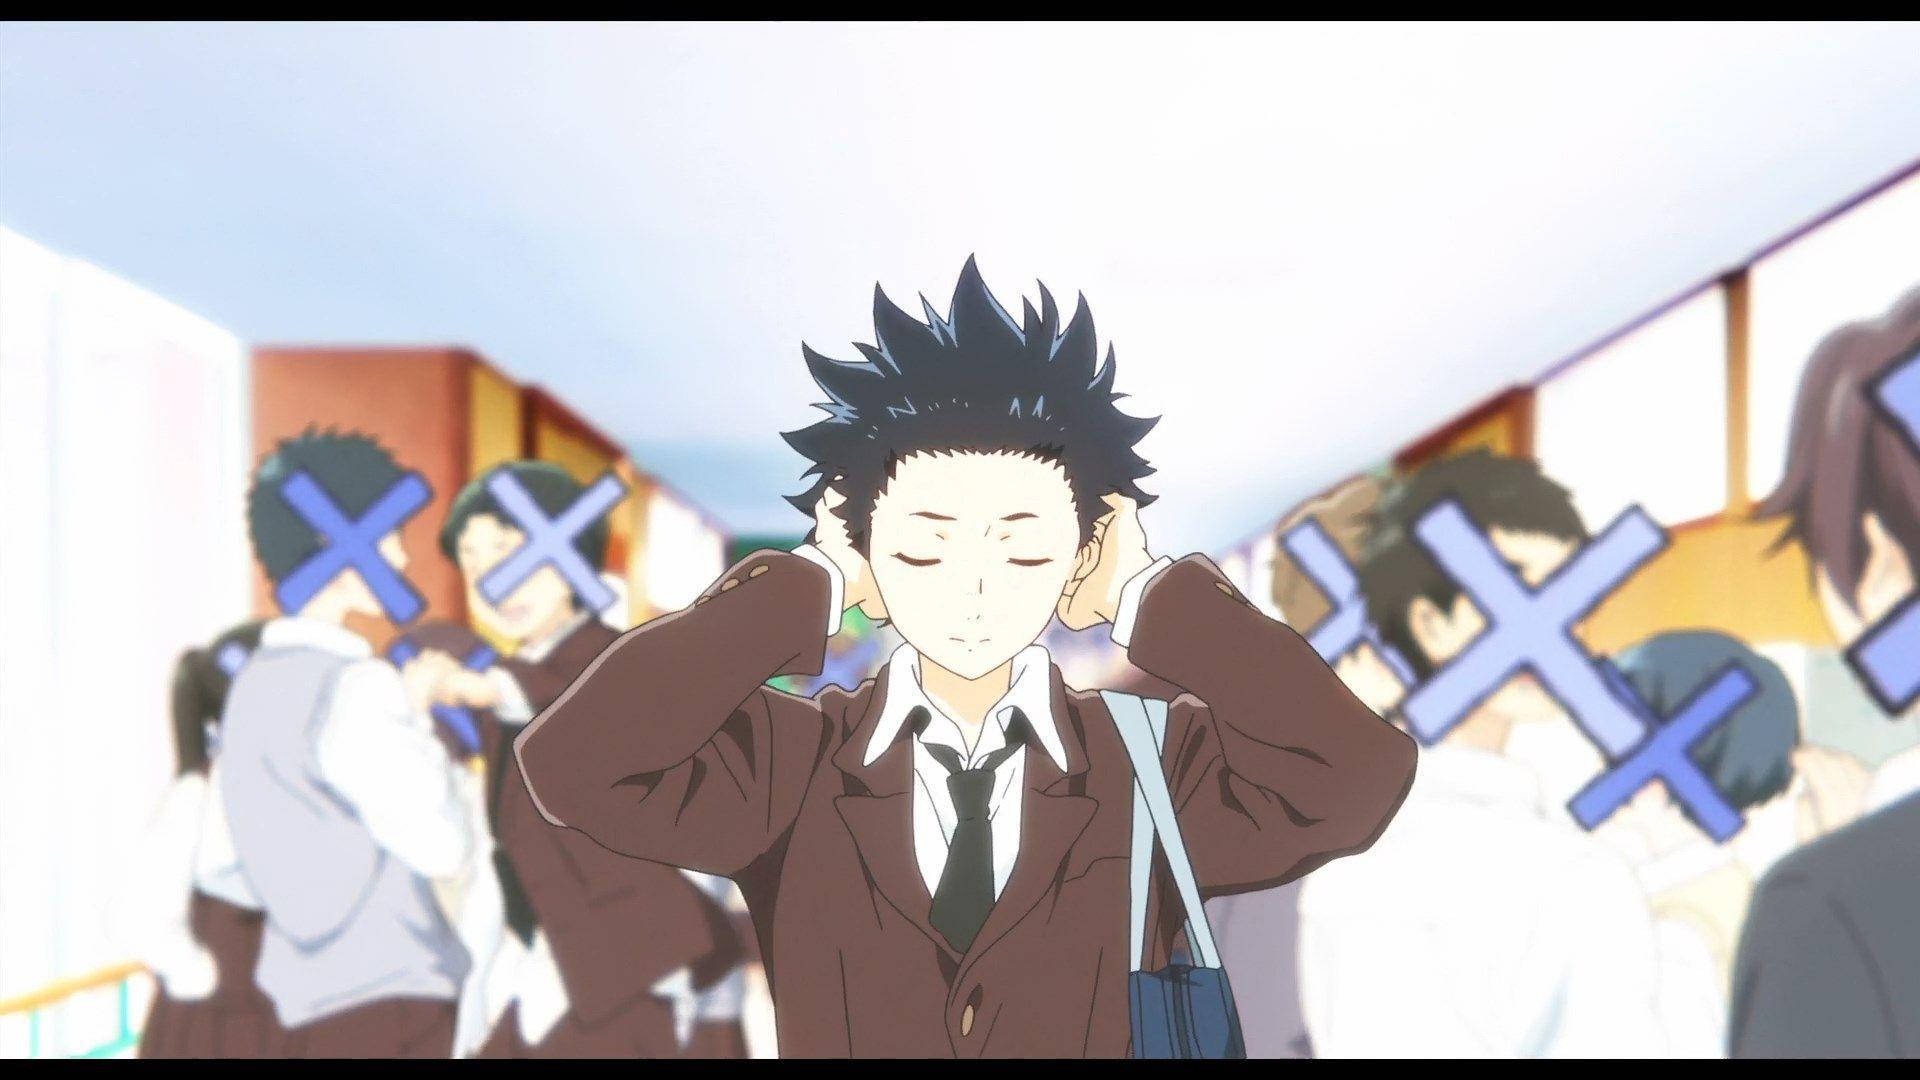 Shoya and Shouko from A Silent Voice form a powerful bond. Wallpaper